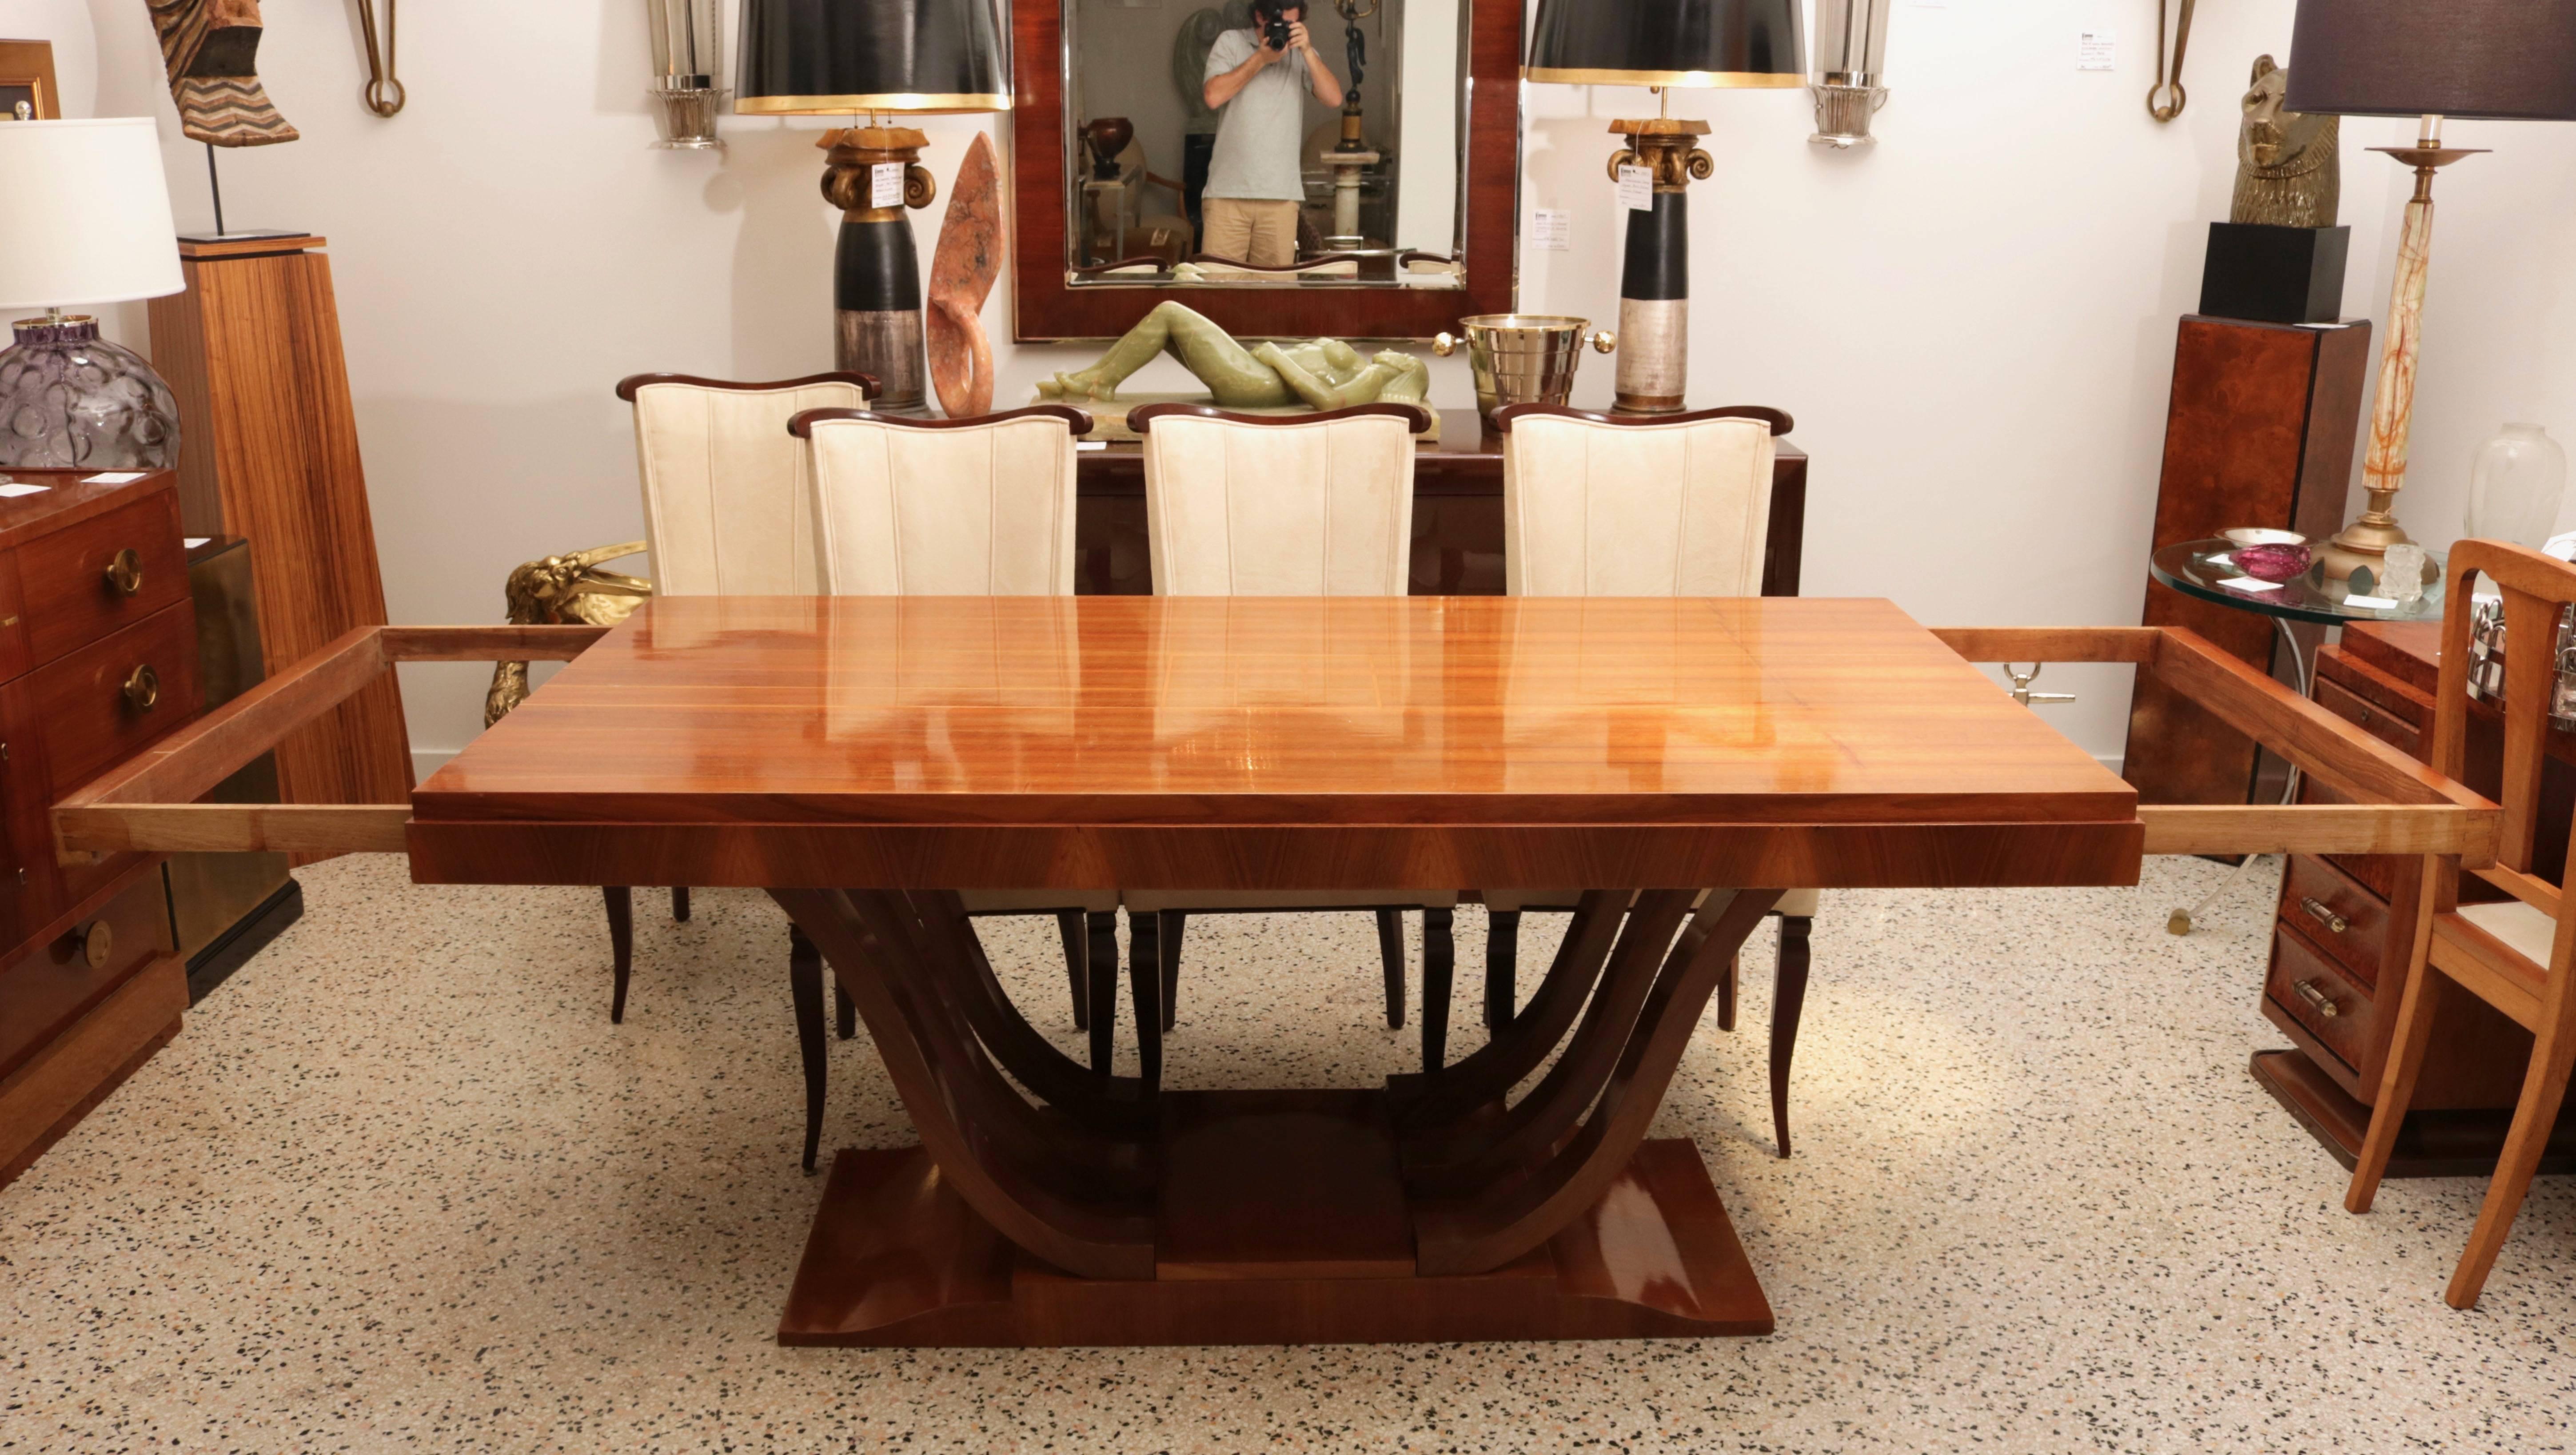 This art deco dining table is the perfect size for a narrow dining room and yet with its leaves installed the table can easily seat eight to ten people. The wood has a soft, golden coloration in a soft mahogany with an inset grid pattern medallion